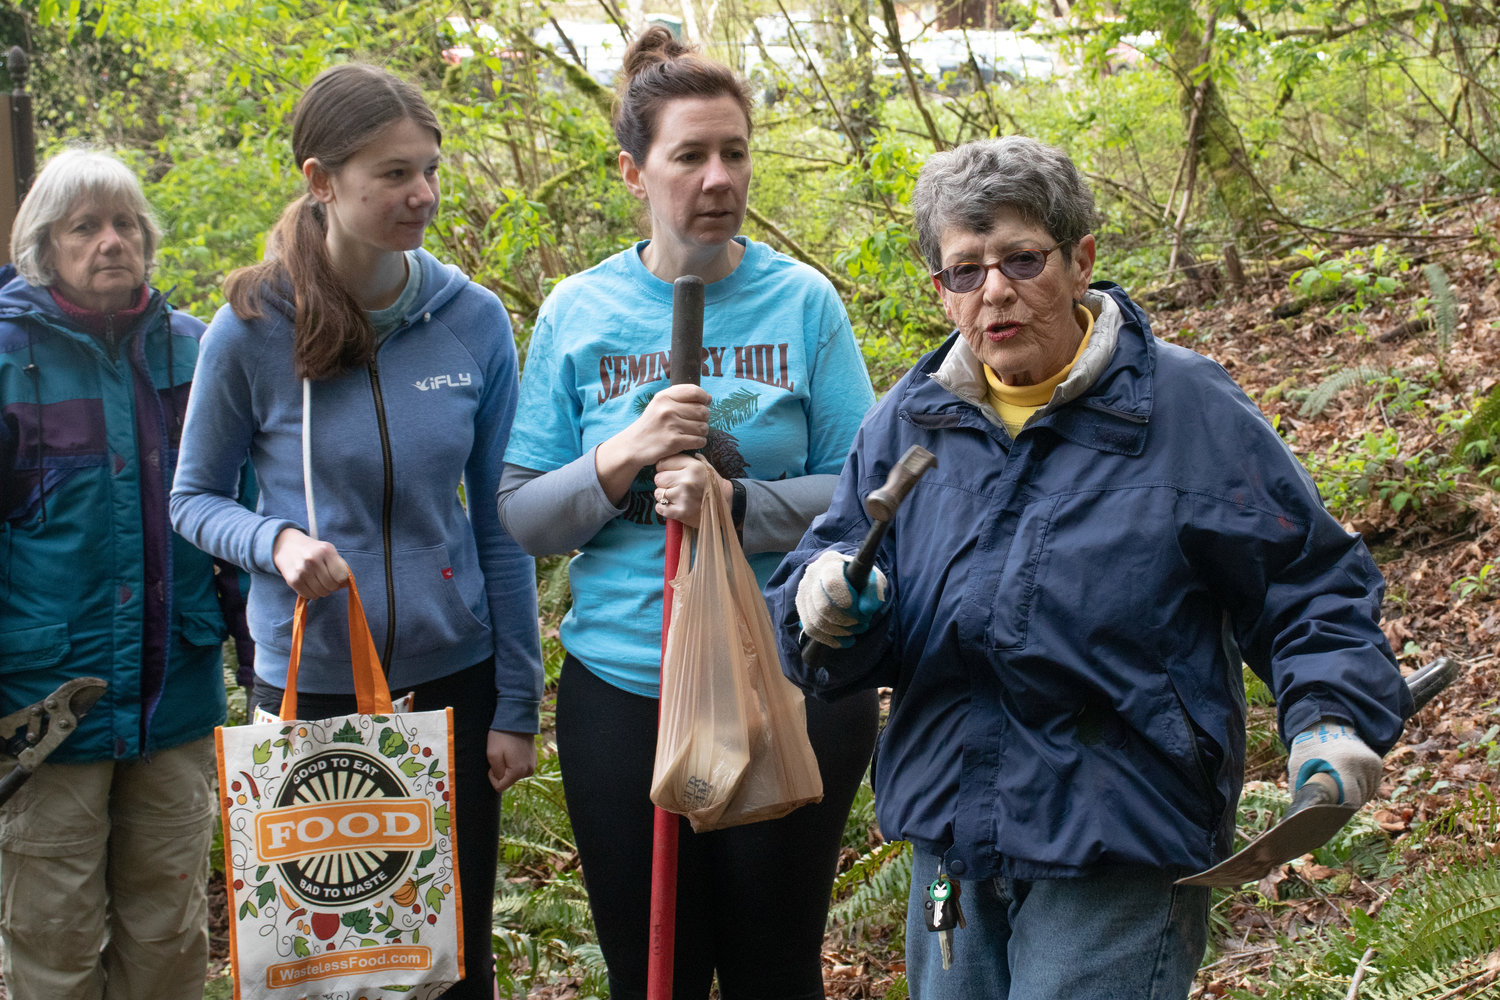 Judi Bell directs volunteers during the Friends of the Seminary Hill Natural Area Earth Day Work Party in Centralia on Saturday.